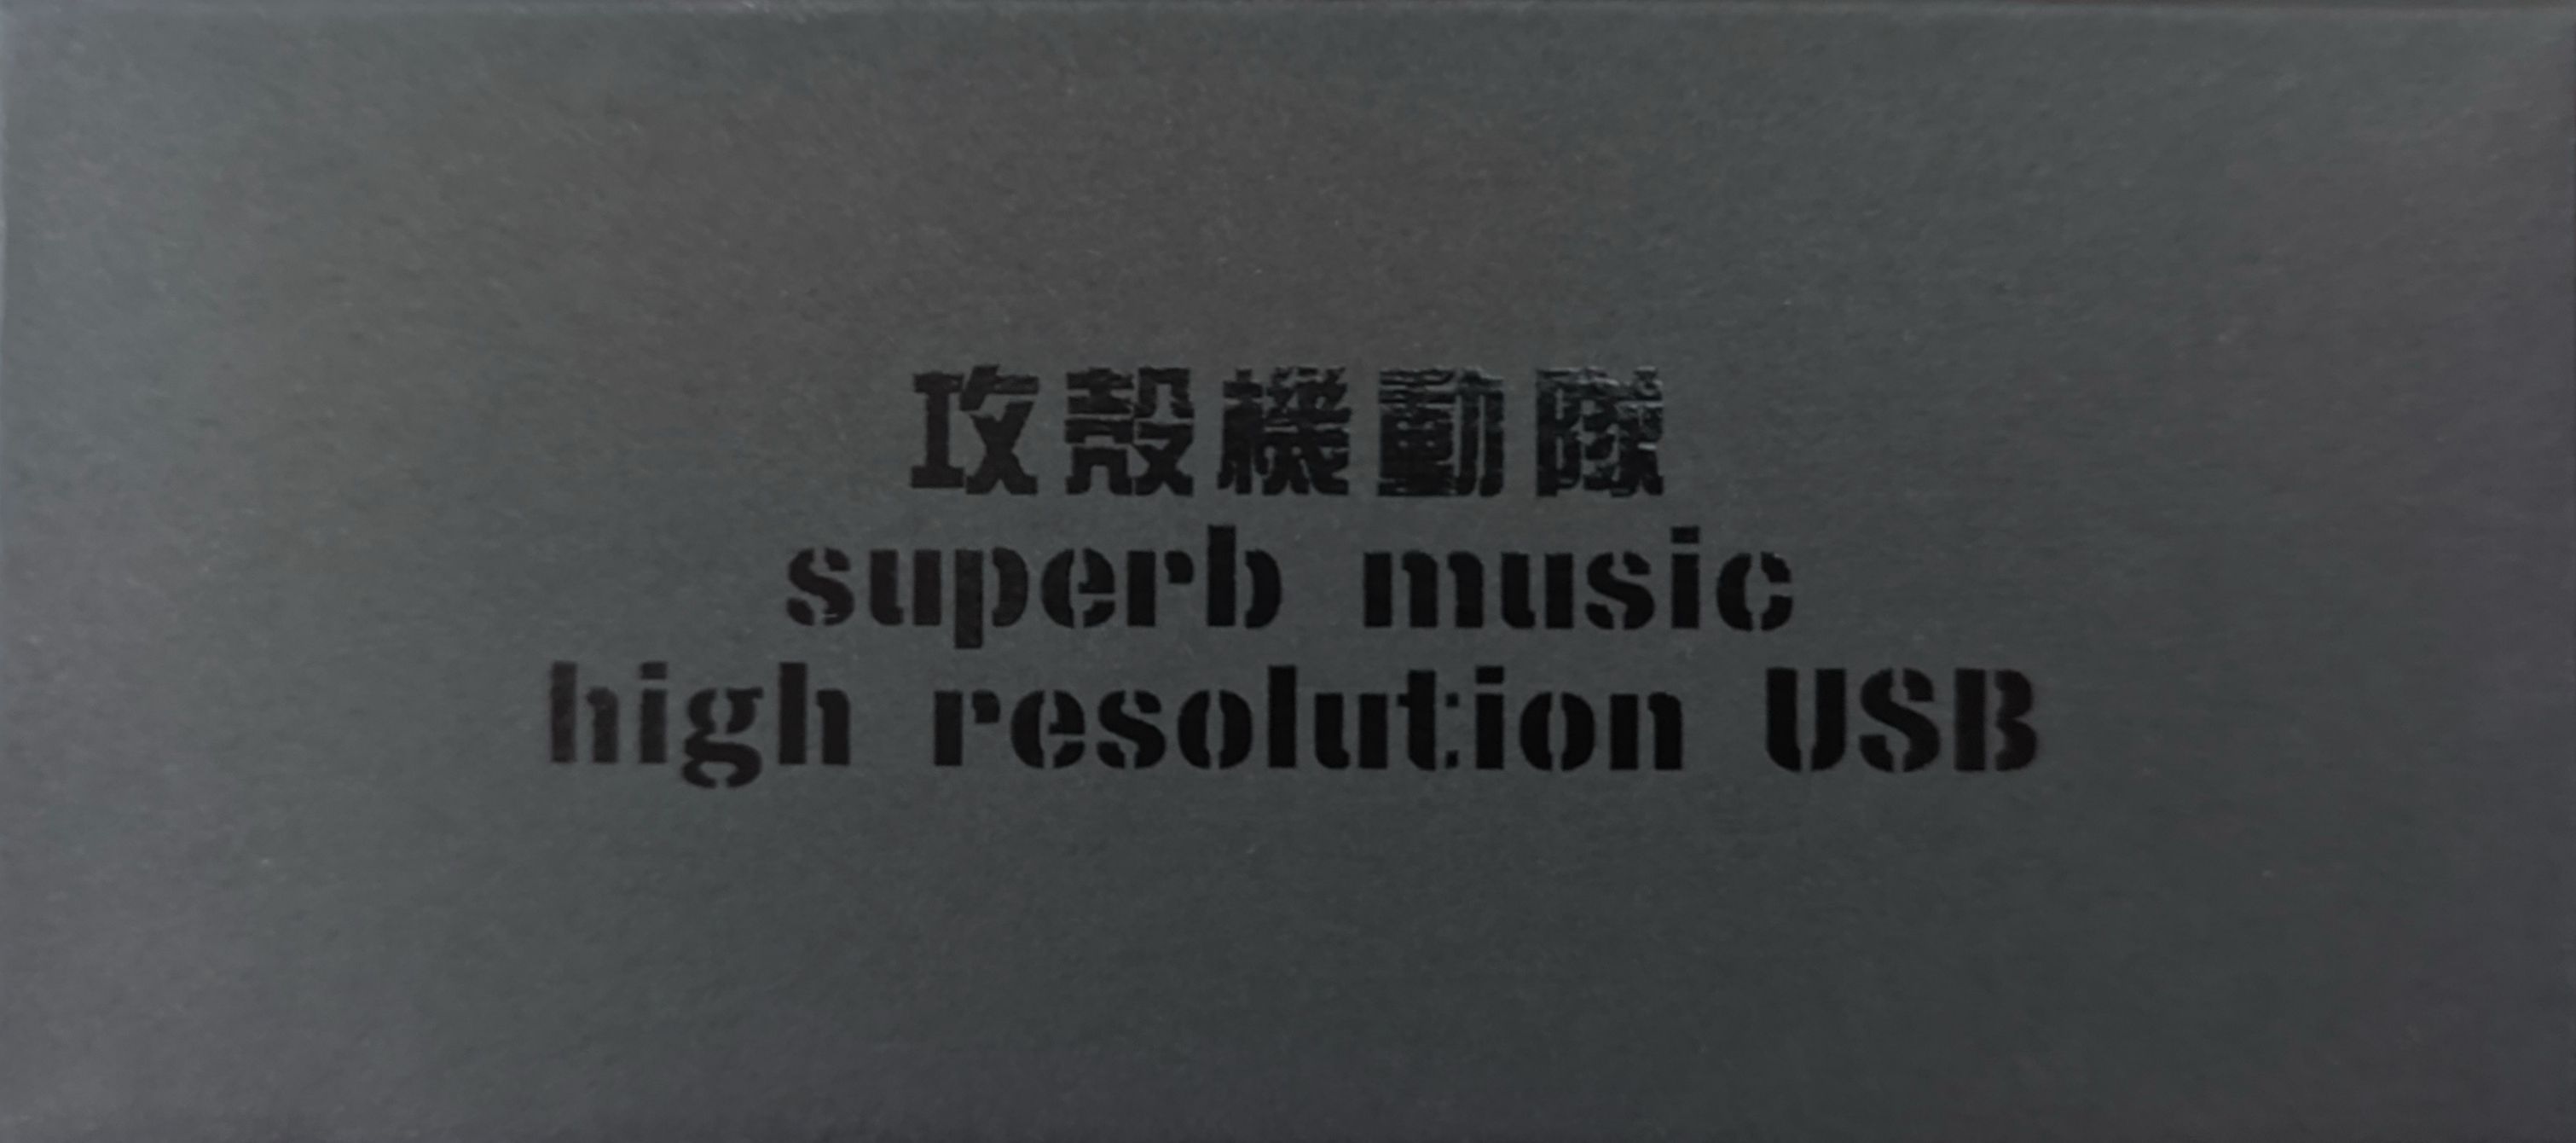 Release “攻殻機動隊 superb music high resolution USB” by Various 